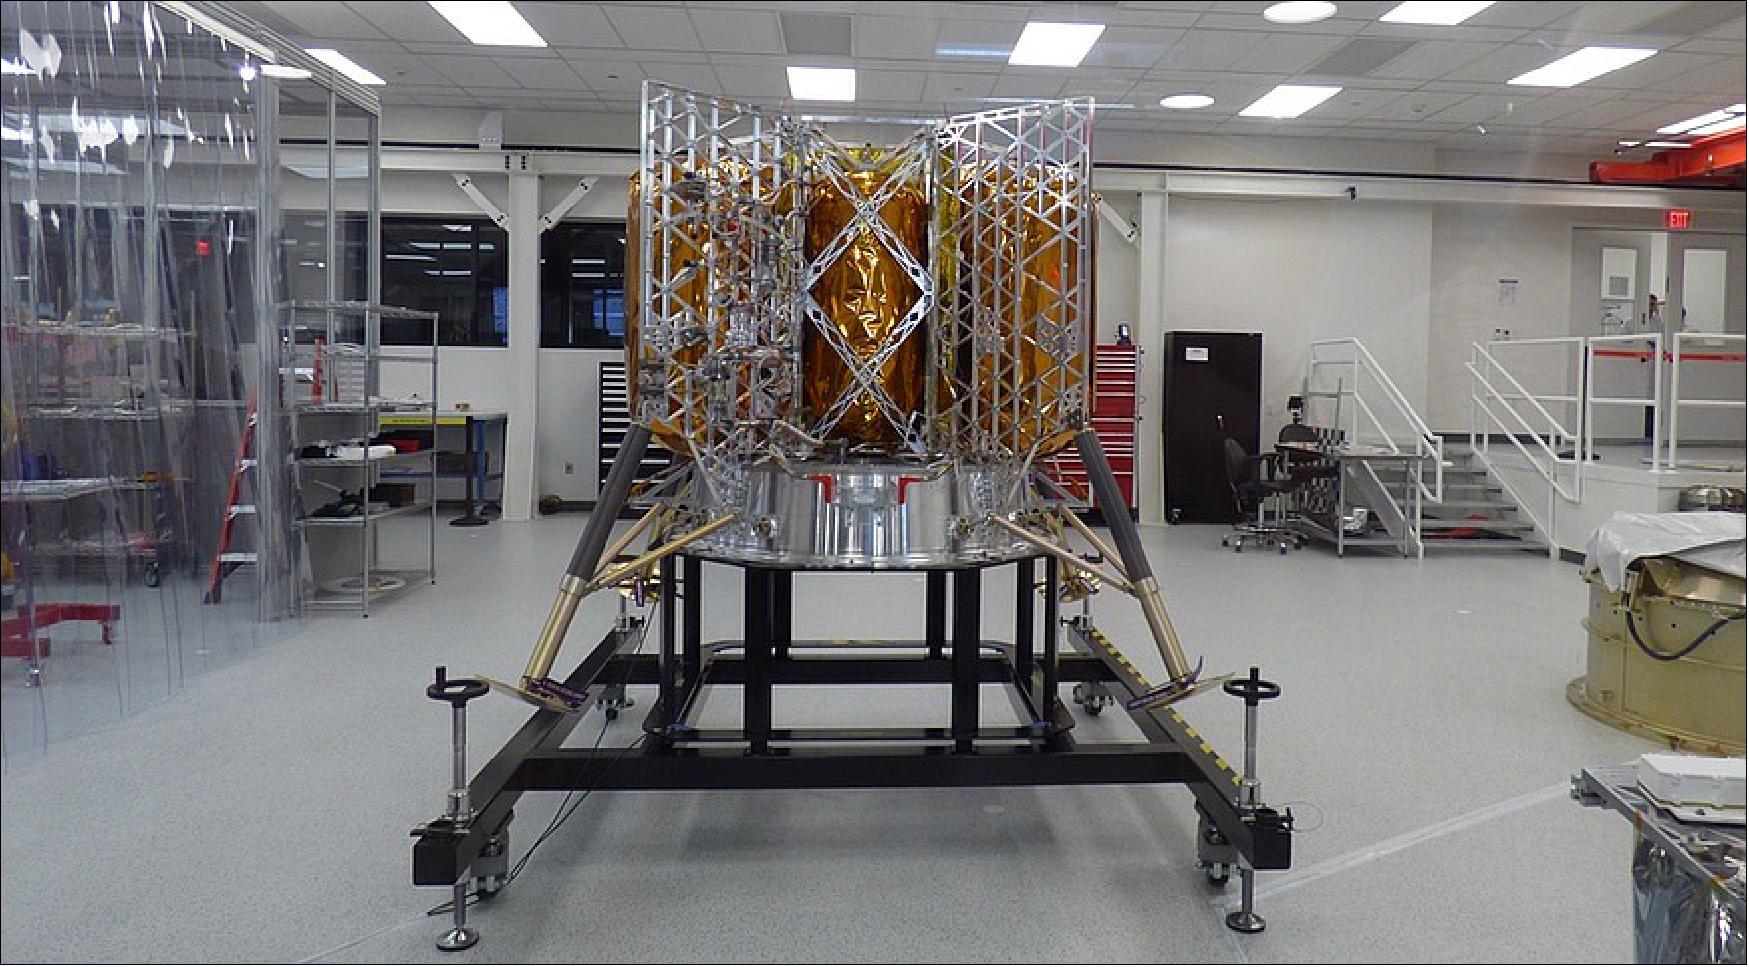 Figure 6: Astrobotic's Peregrine lander, in the latter phases of assembly, is on track to launch by the end of the year, the company said April 20 (image credit: SpaceNews/Jeff Foust)